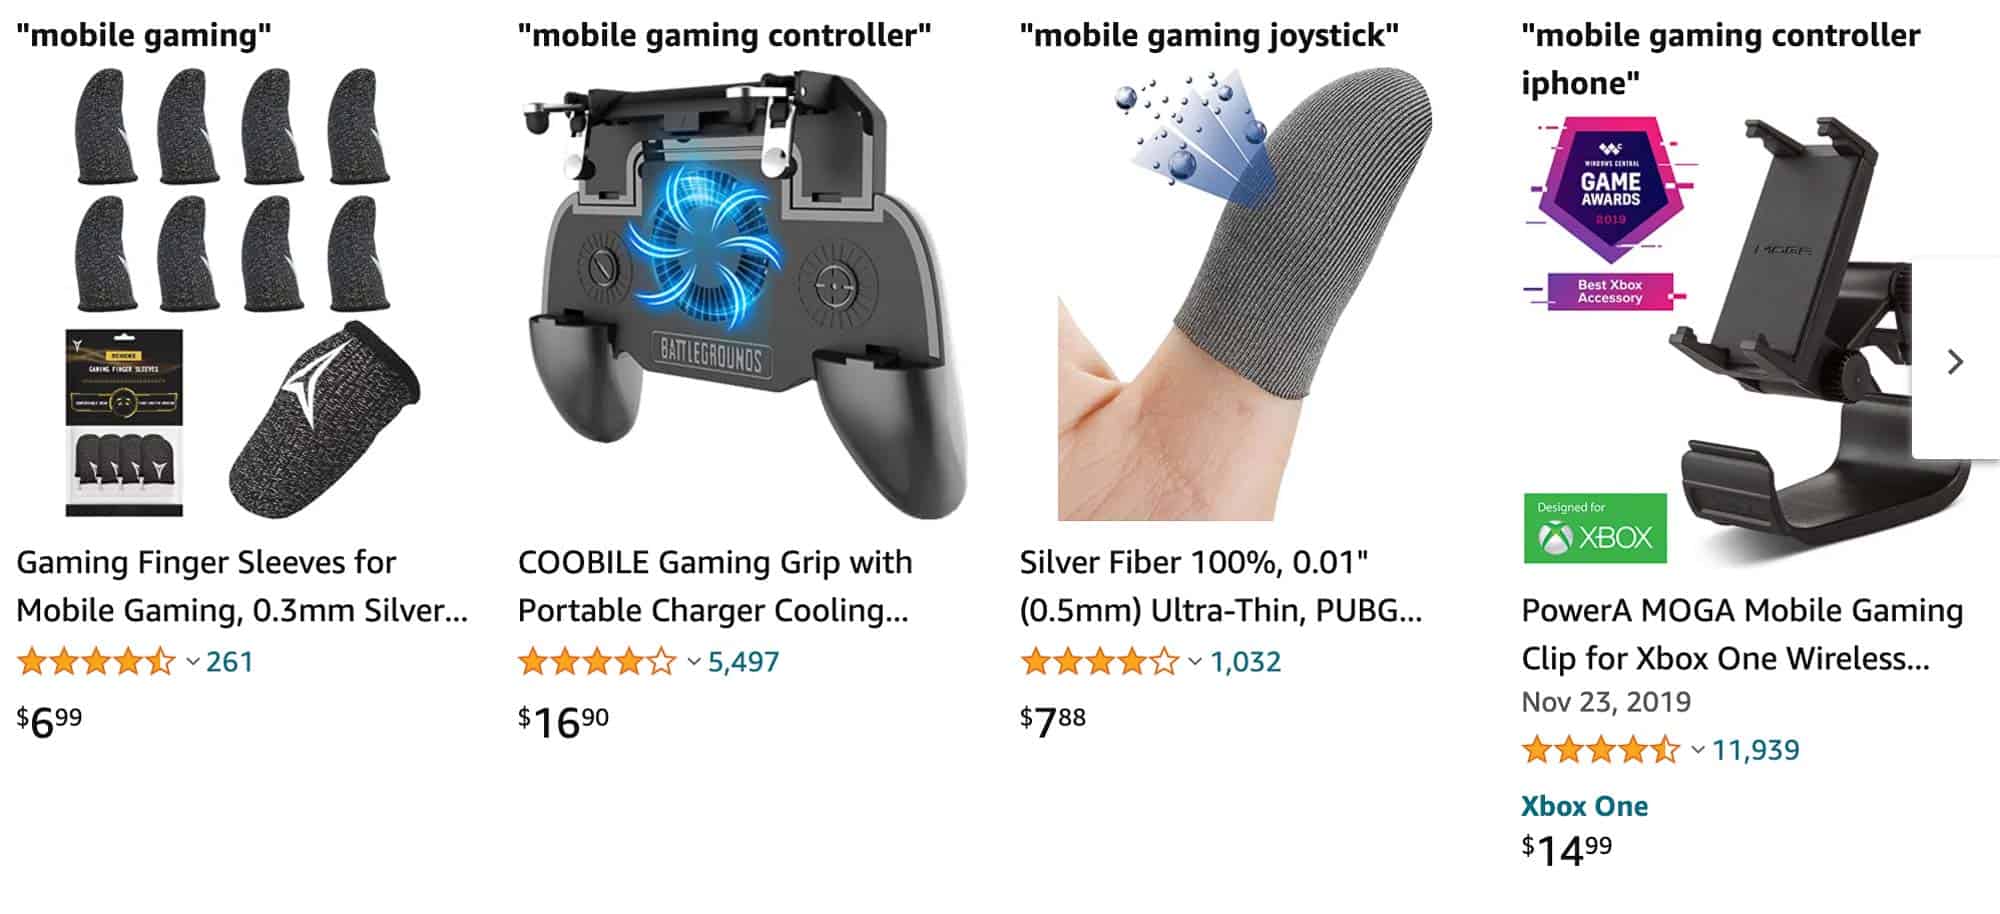 mobile gaming proudcts